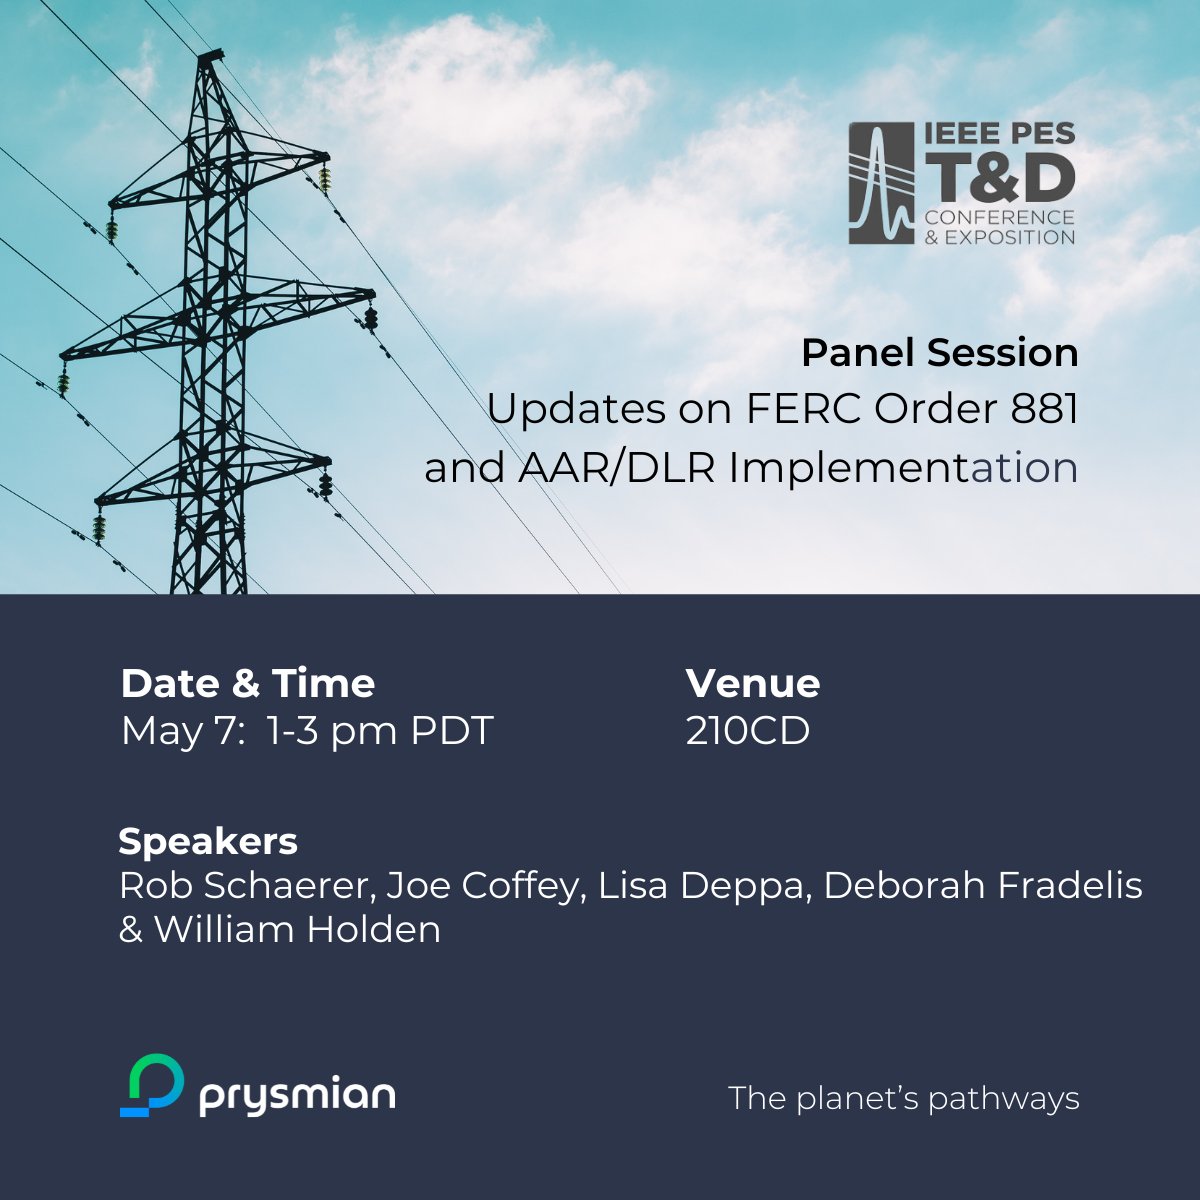 Attention IEEE PES T&D Attendees: Join us this afternoon for a panel session featuring our Director of Transmission, Joe Coffey, on Updates on FERC Order 881 and AAR/DLR Implementation. The session will discuss how different utilities and RTO/ISOs are implementing Order 881 and…